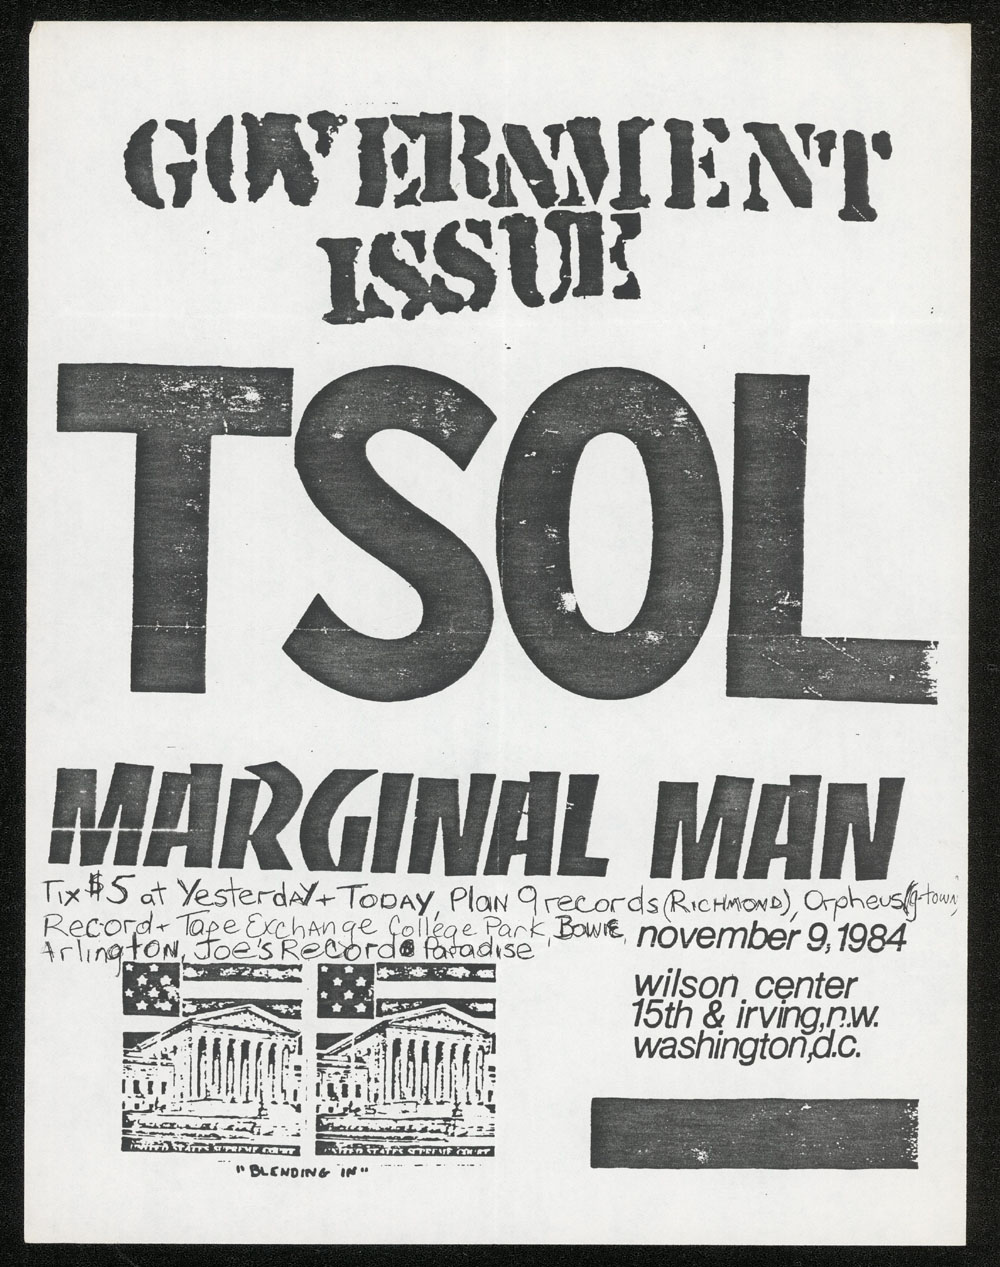 GOVERNMENT ISSUE w/ TSOL, Marginal Man at Wilson Center